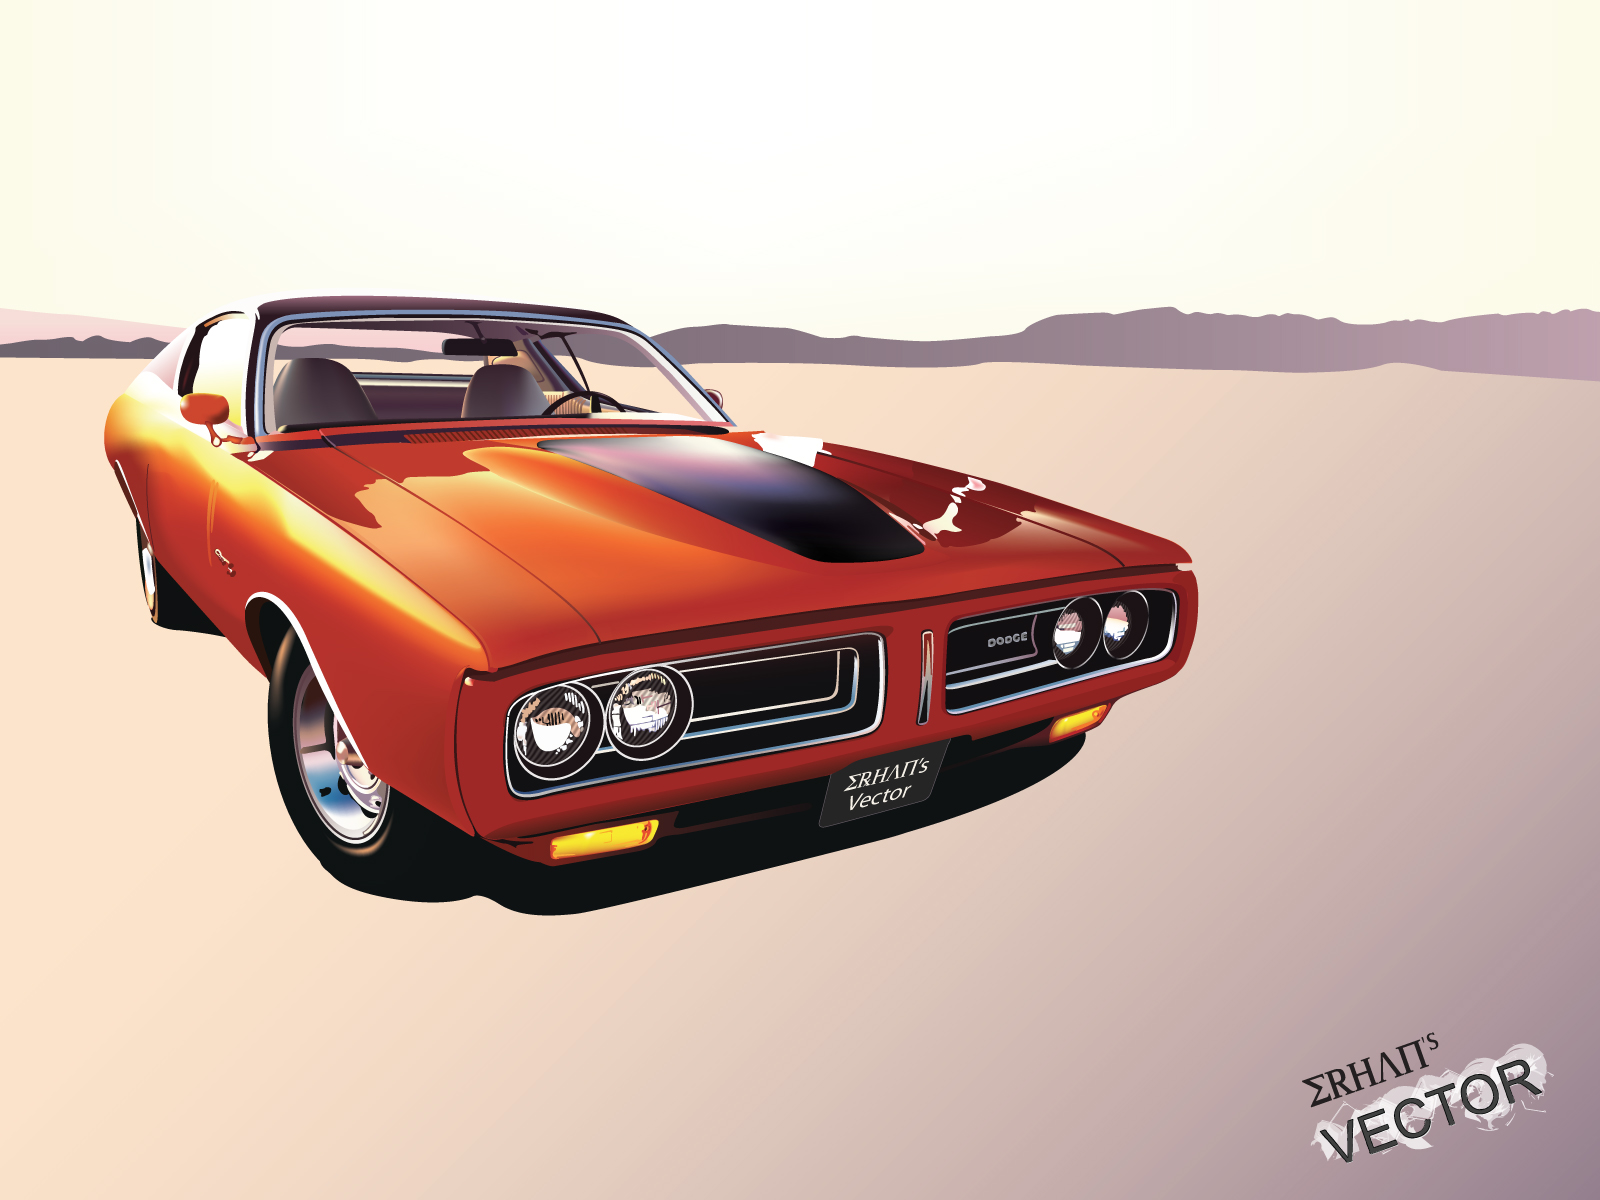 Dodge_Charger___Vector___by_Imperatore34.jpg